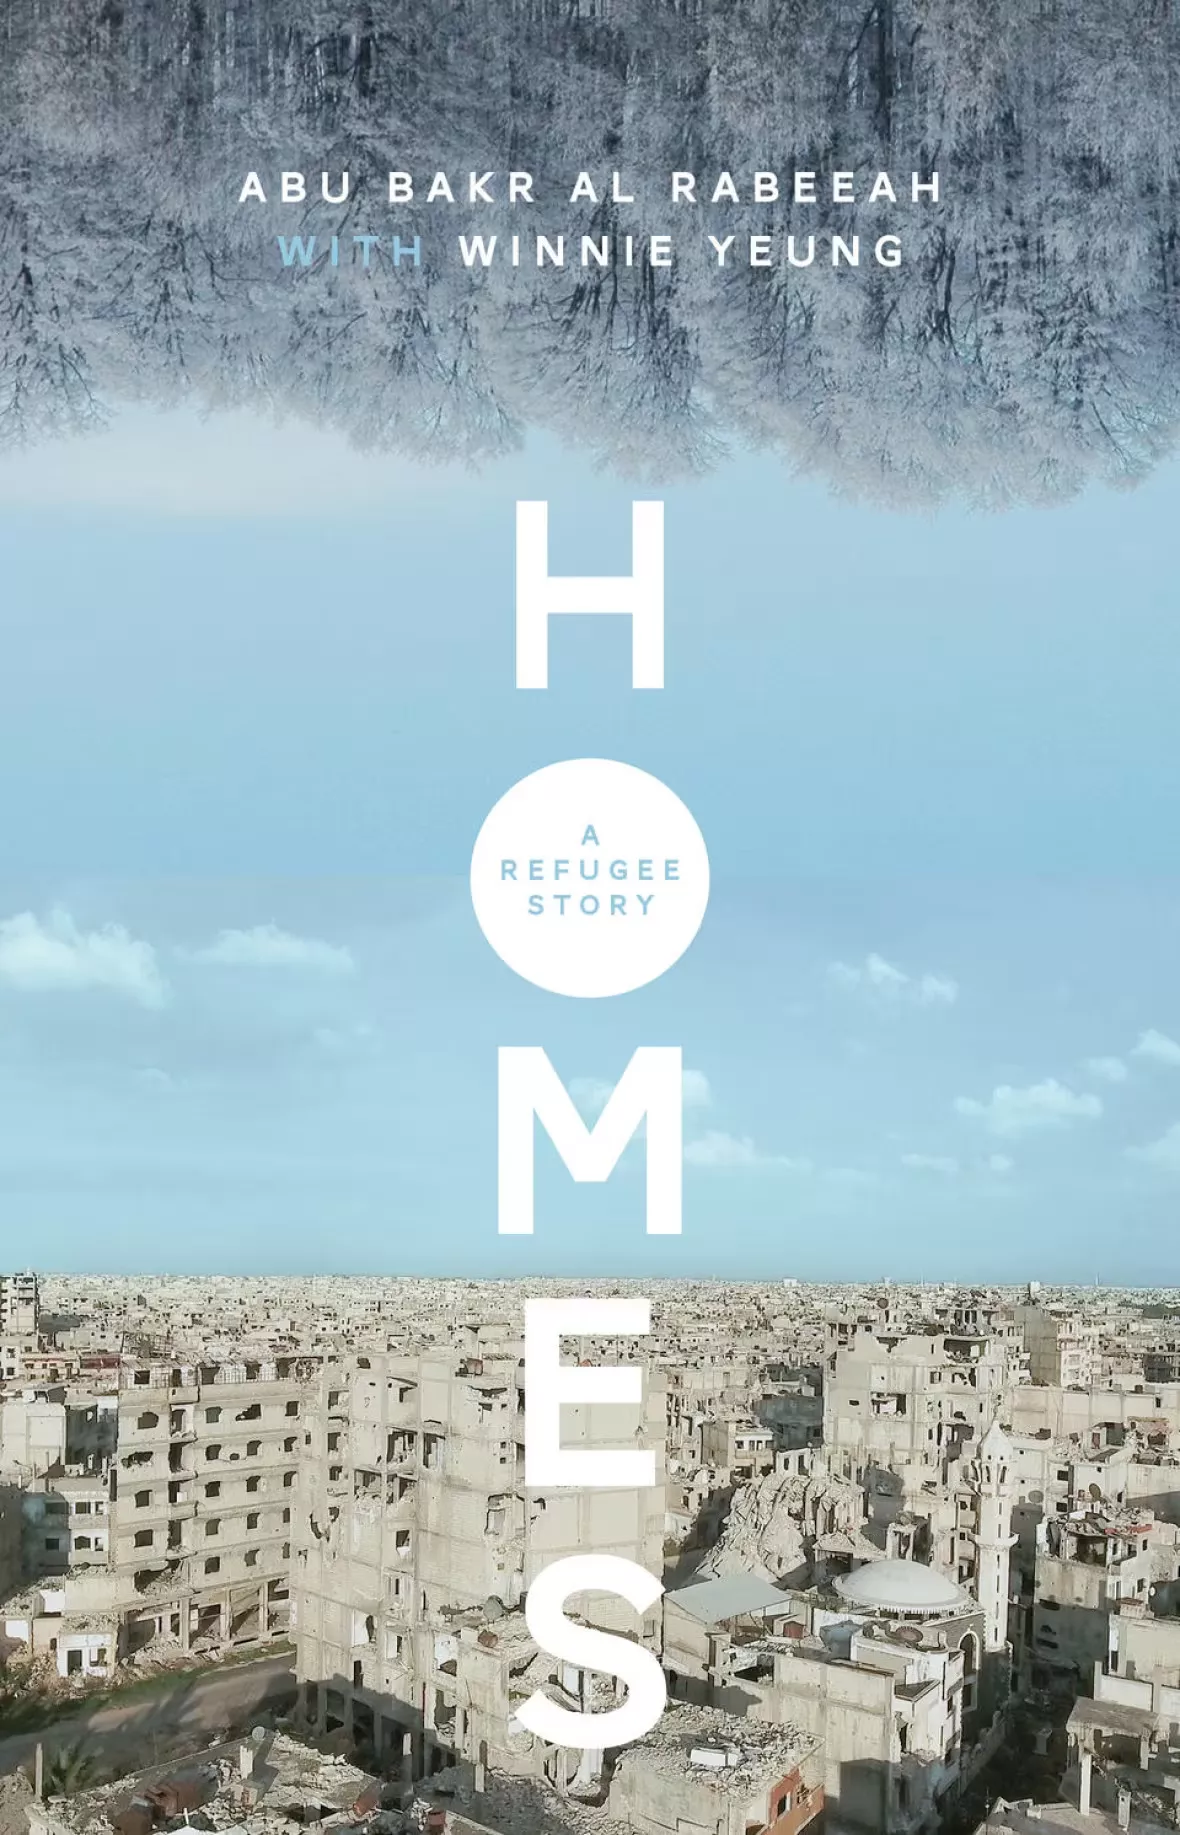 Homes book cover